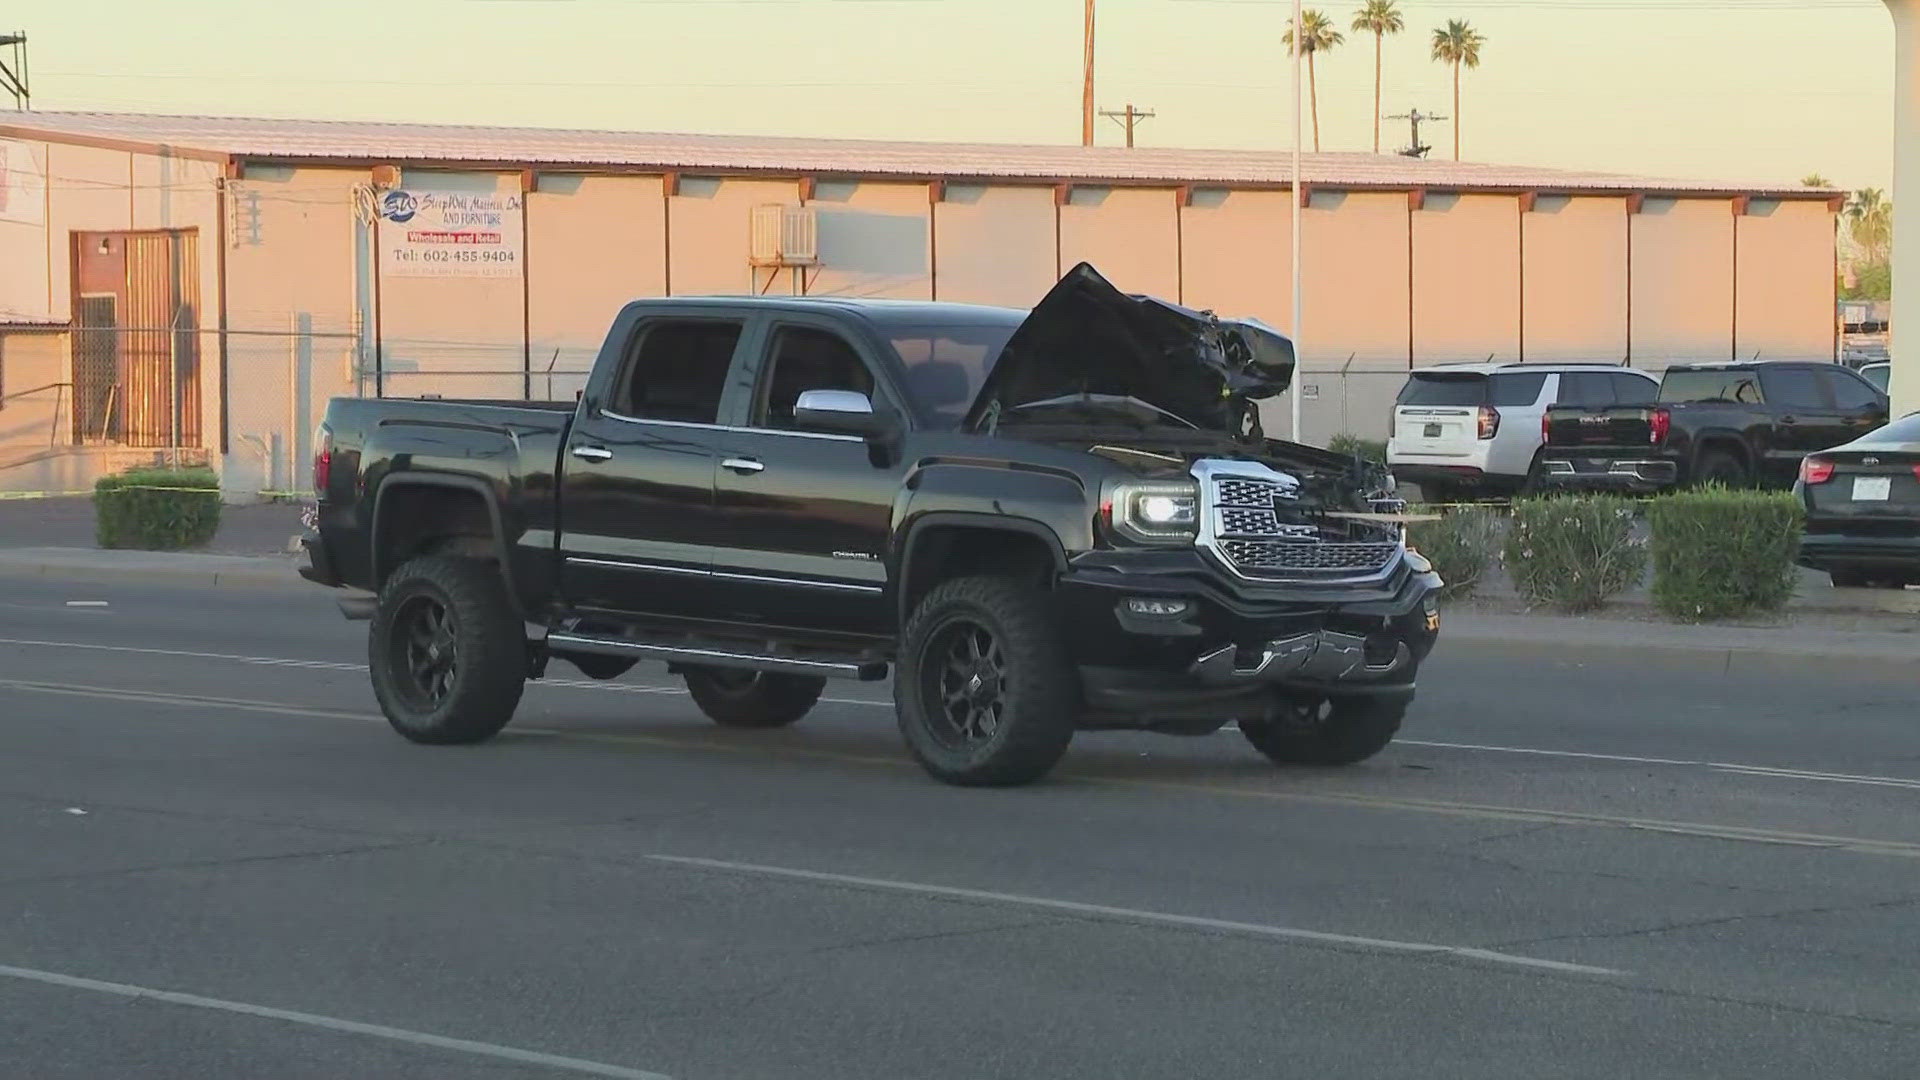 A pedestrian is dead after being hit by a truck Tuesday morning near 35th and Whitton avenues in Phoenix.